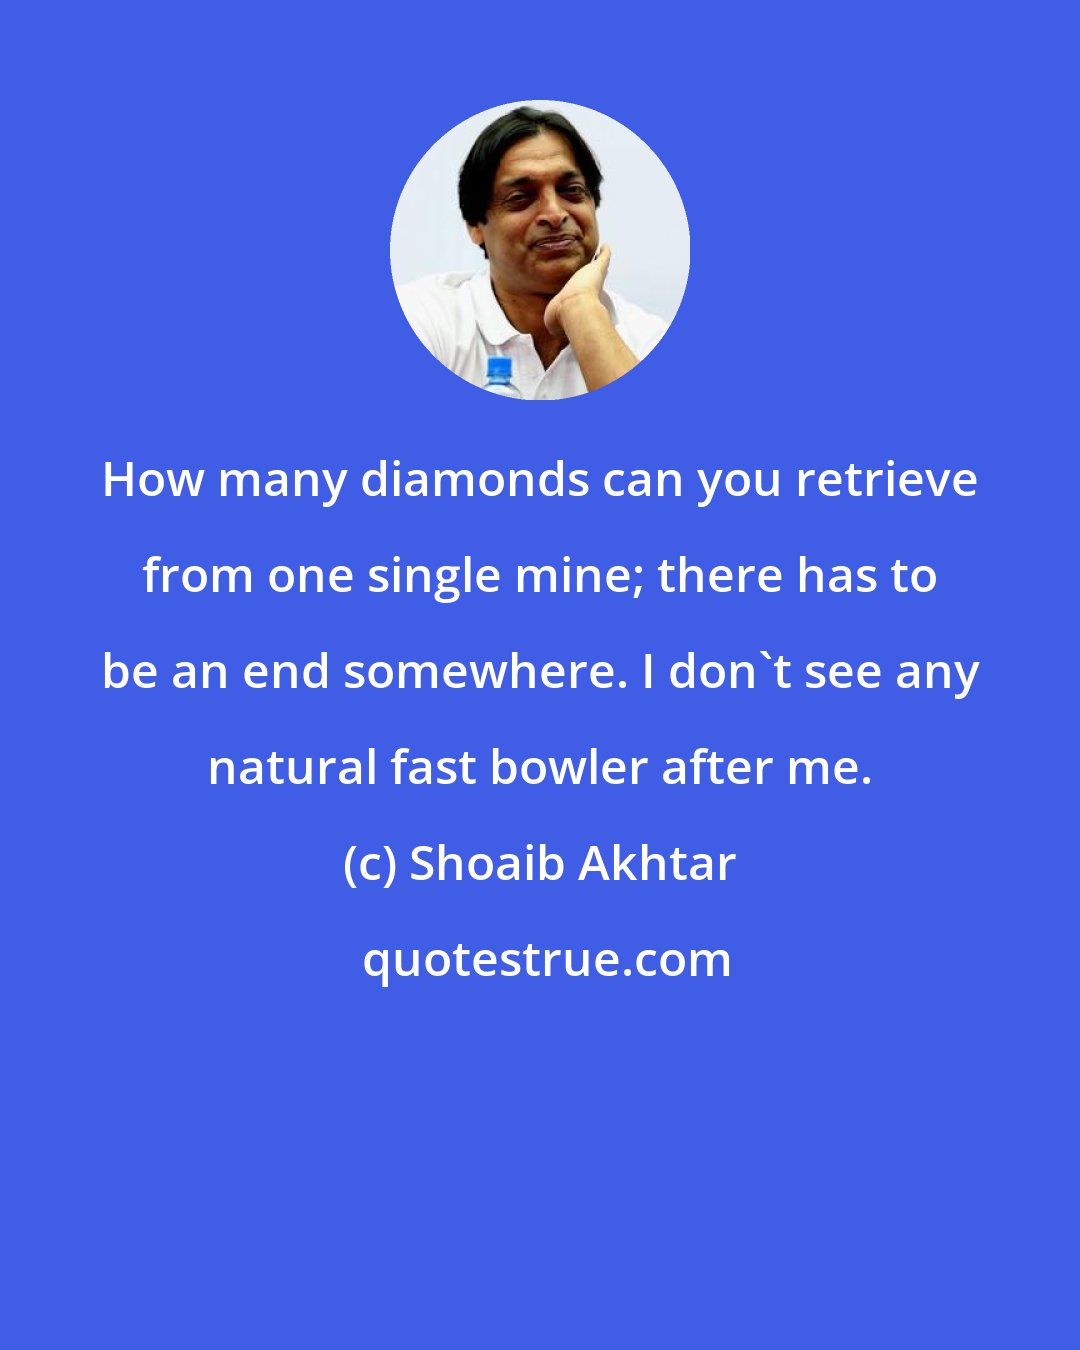 Shoaib Akhtar: How many diamonds can you retrieve from one single mine; there has to be an end somewhere. I don't see any natural fast bowler after me.